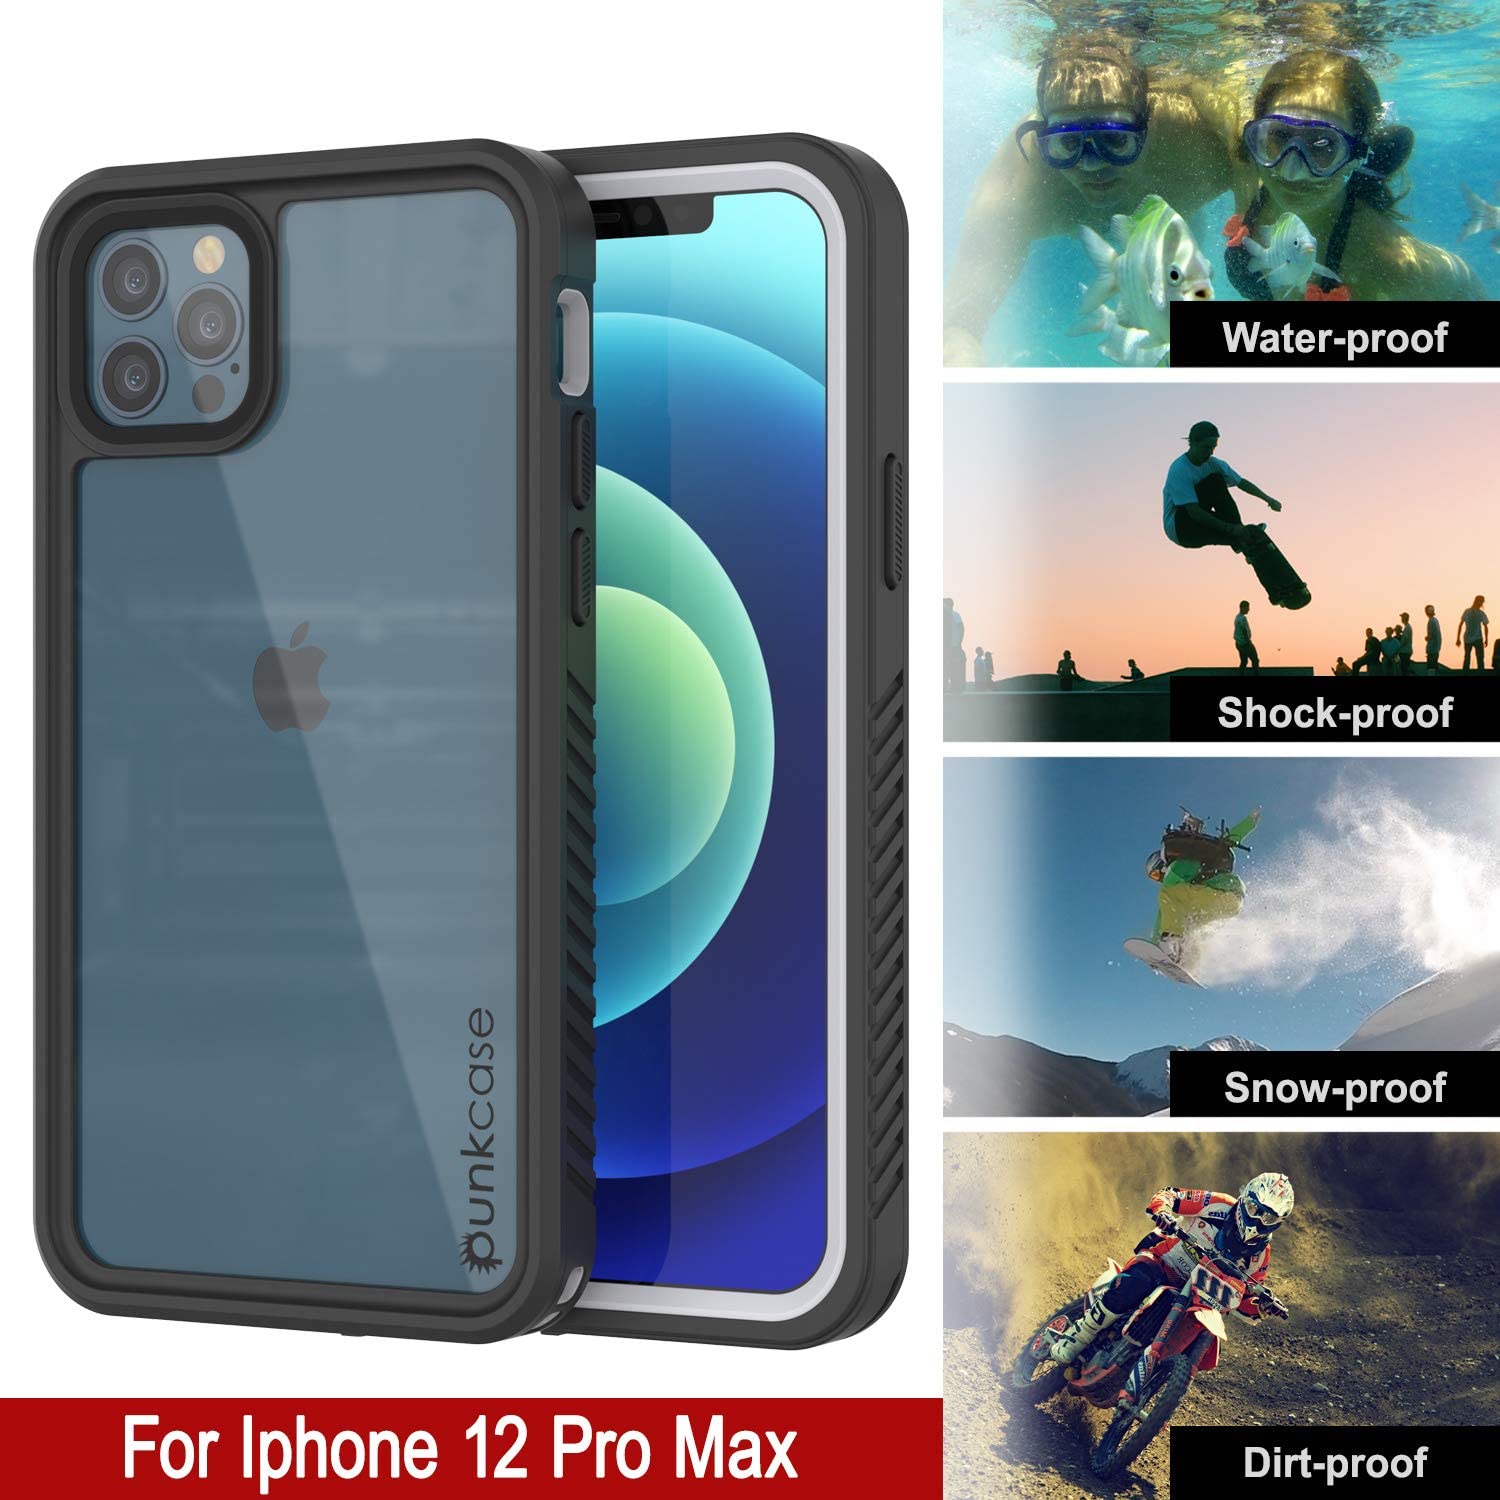 iPhone 12 Pro Max Waterproof Case, Punkcase [Extreme Series] Armor Cover W/ Built In Screen Protector [White]